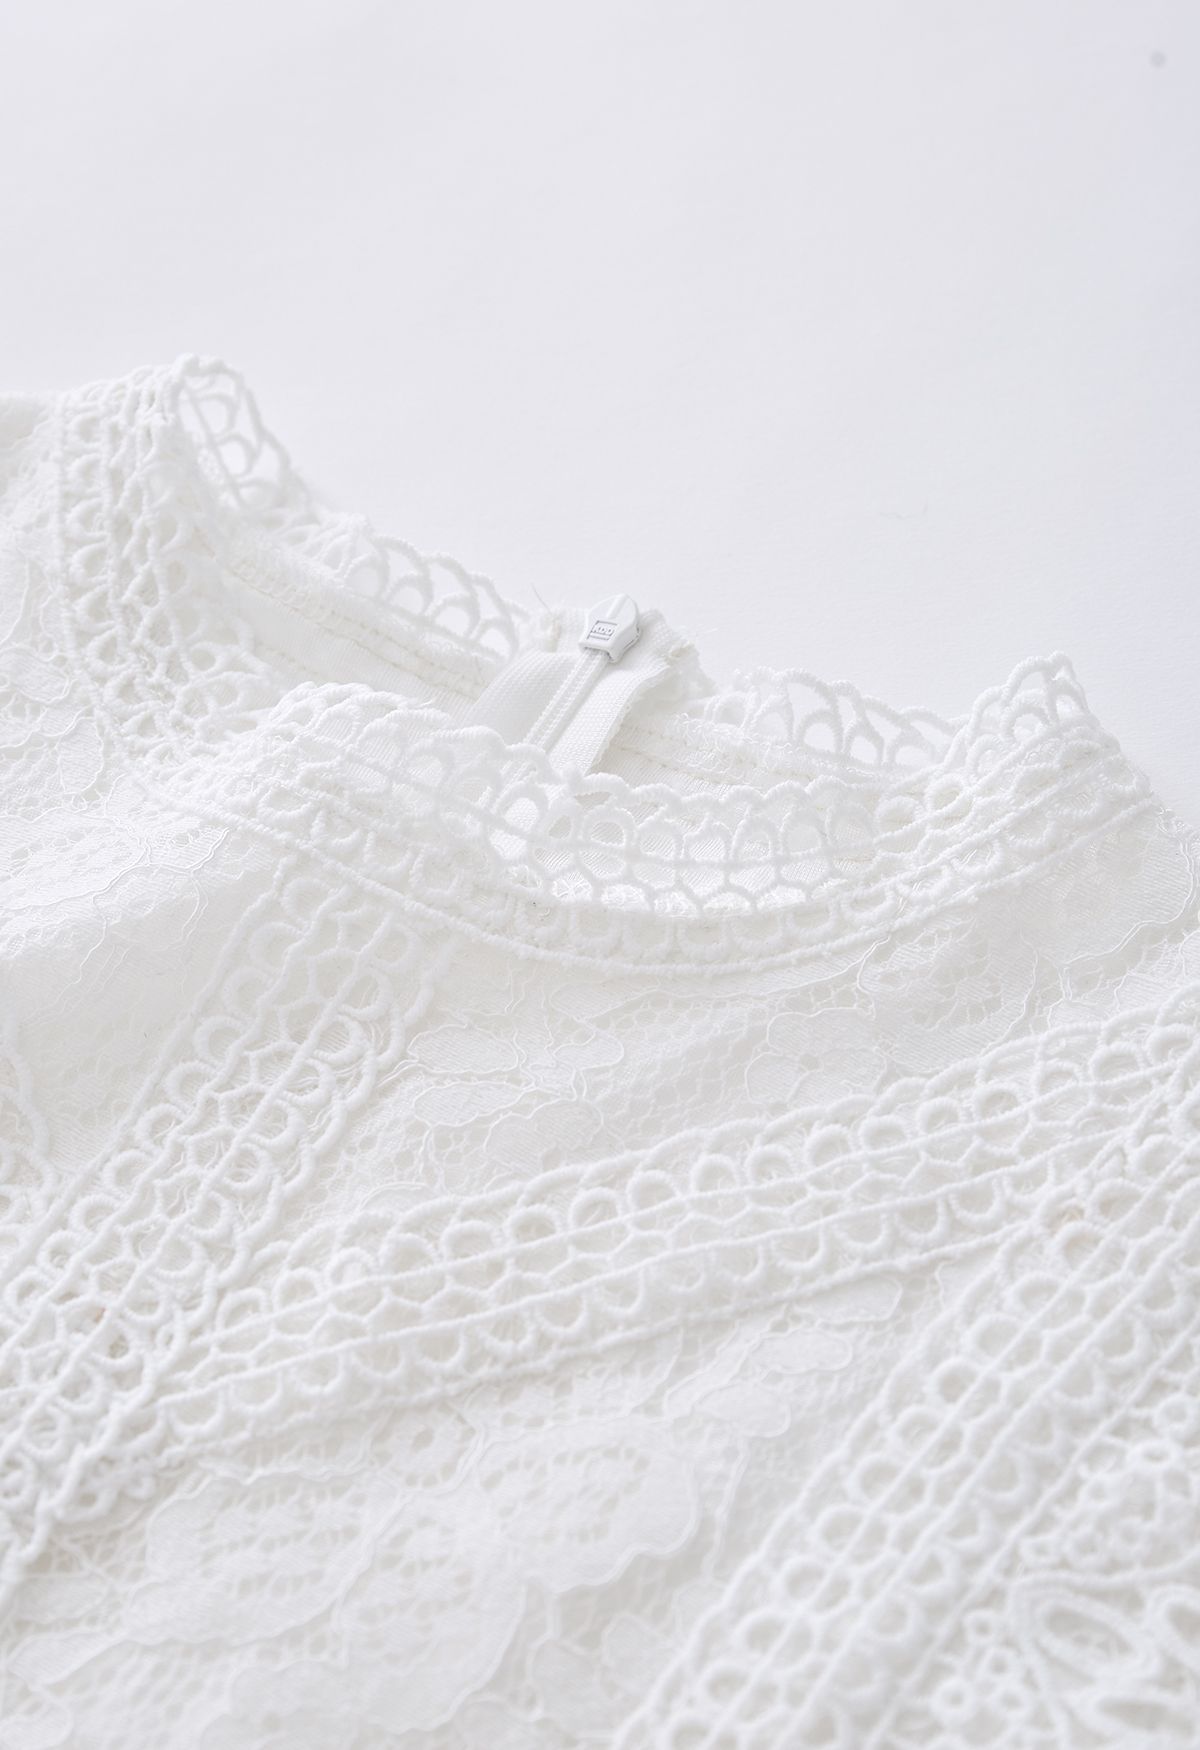 Your Sassy Start Long Sleeve Crochet Lace Top in White